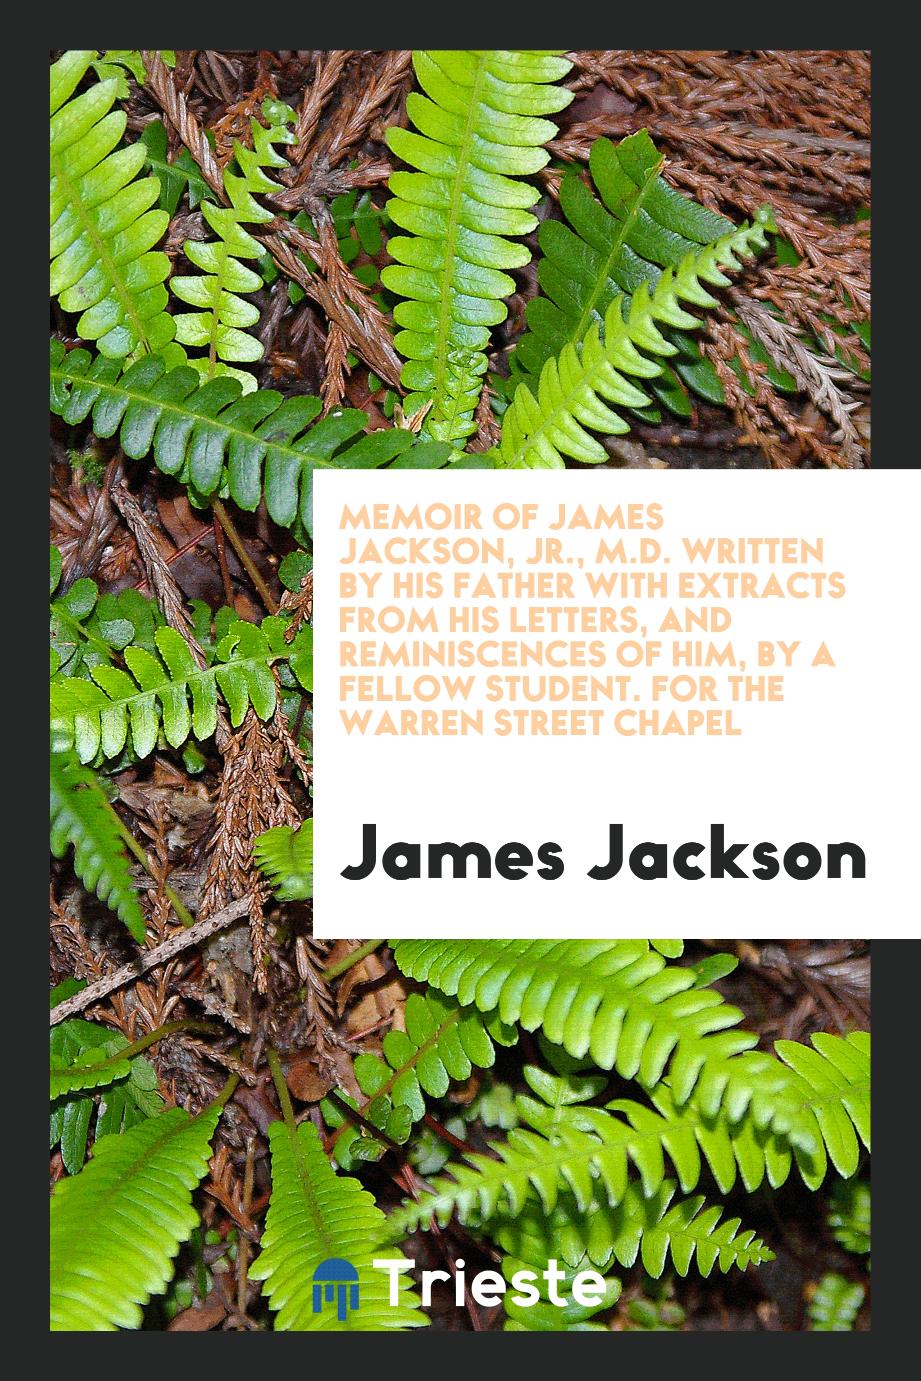 Memoir of James Jackson, jr., M.D. Written by His Father with Extracts from His Letters, and Reminiscences of Him, by a Fellow Student. For the Warren Street Chapel